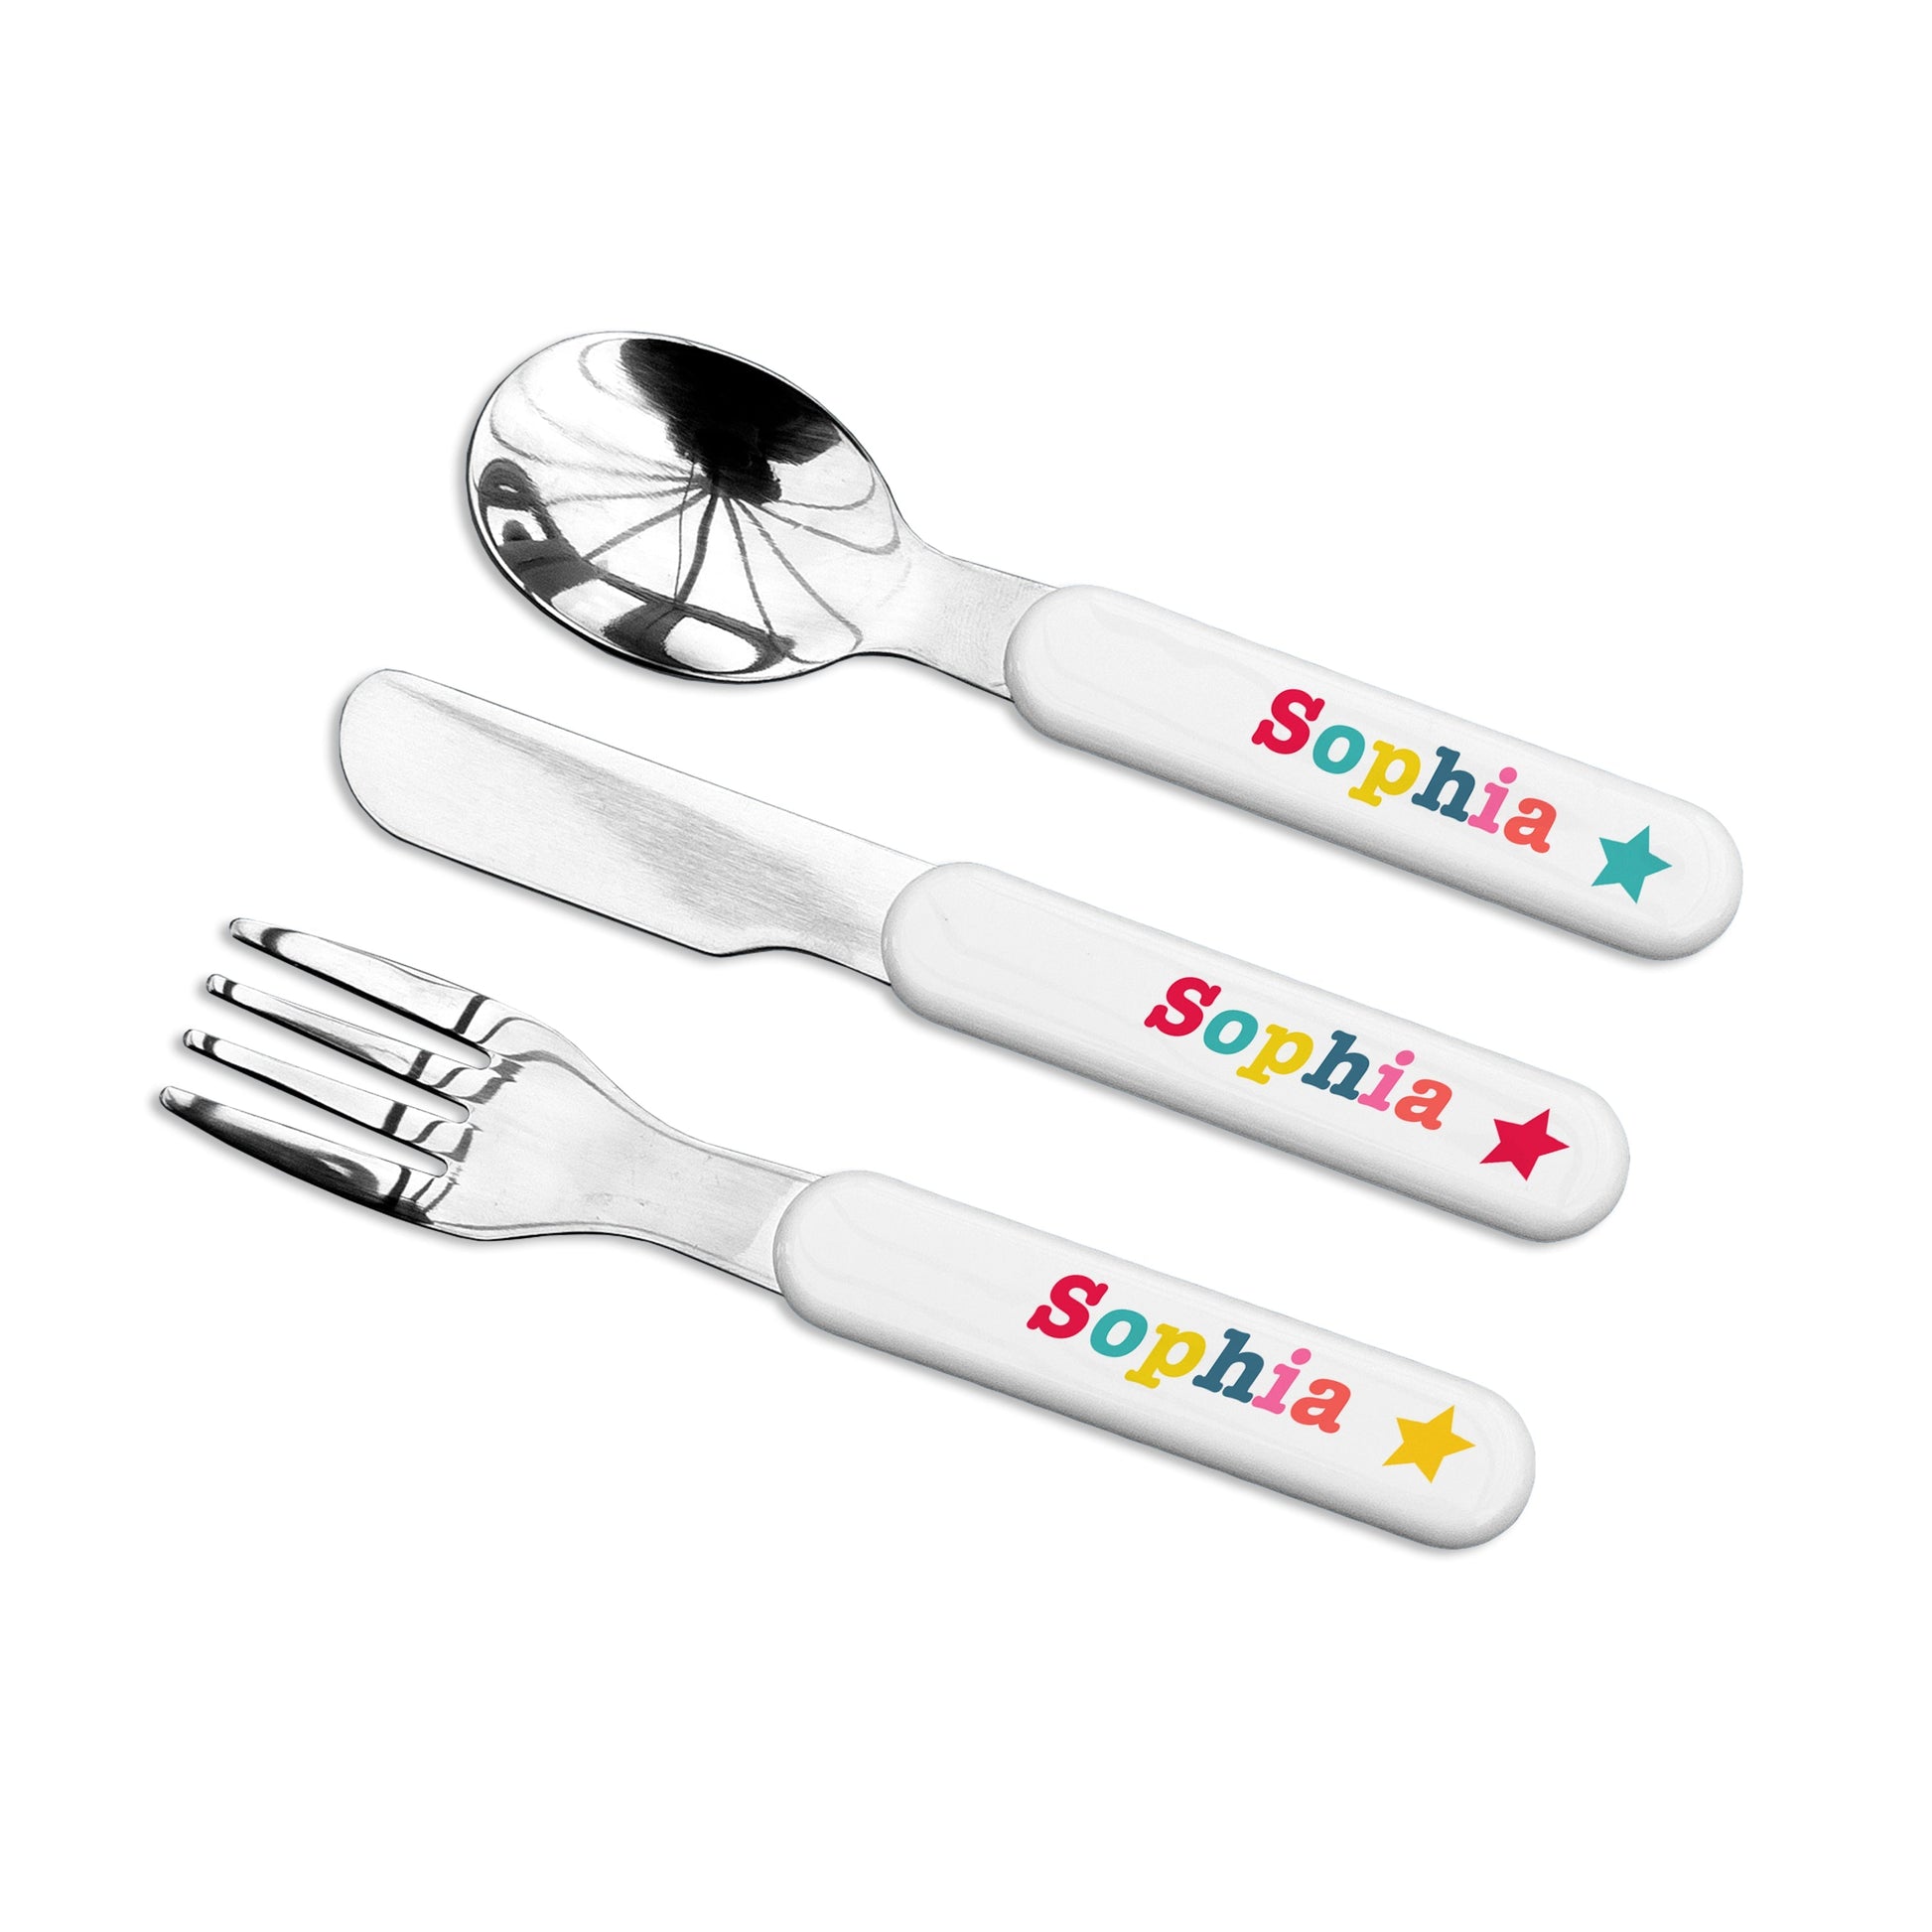 Personalized Metal Cutlery Sets - Personalized Kid's Circus Metal Cutlery Set 